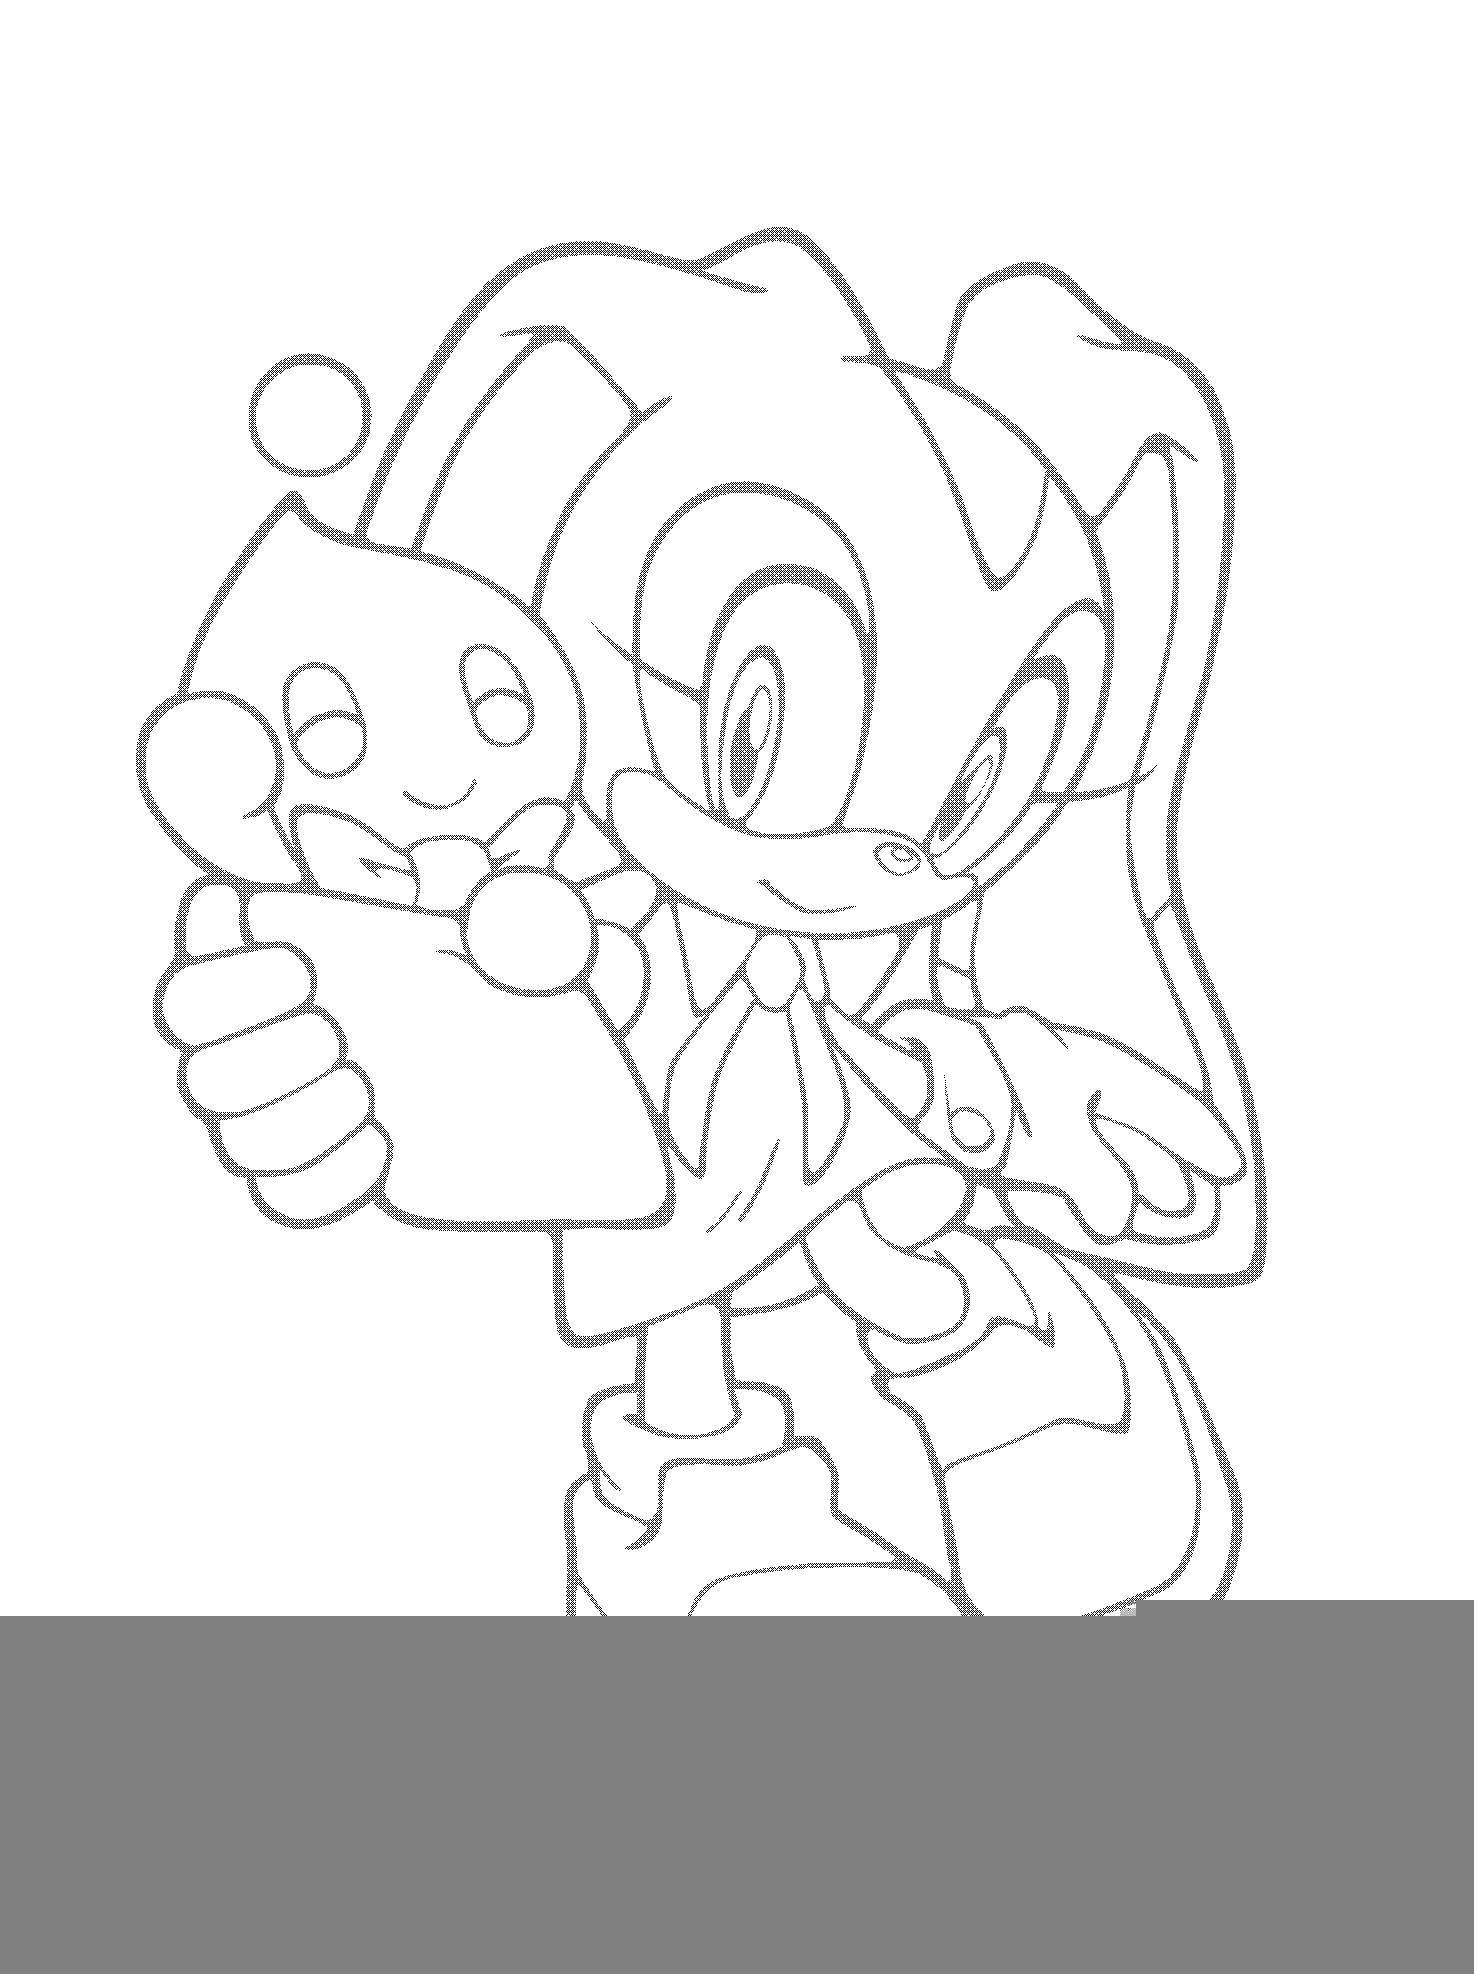 Coloring Girlfriend sonic. Category coloring pages sonic. Tags:  Cartoon character.